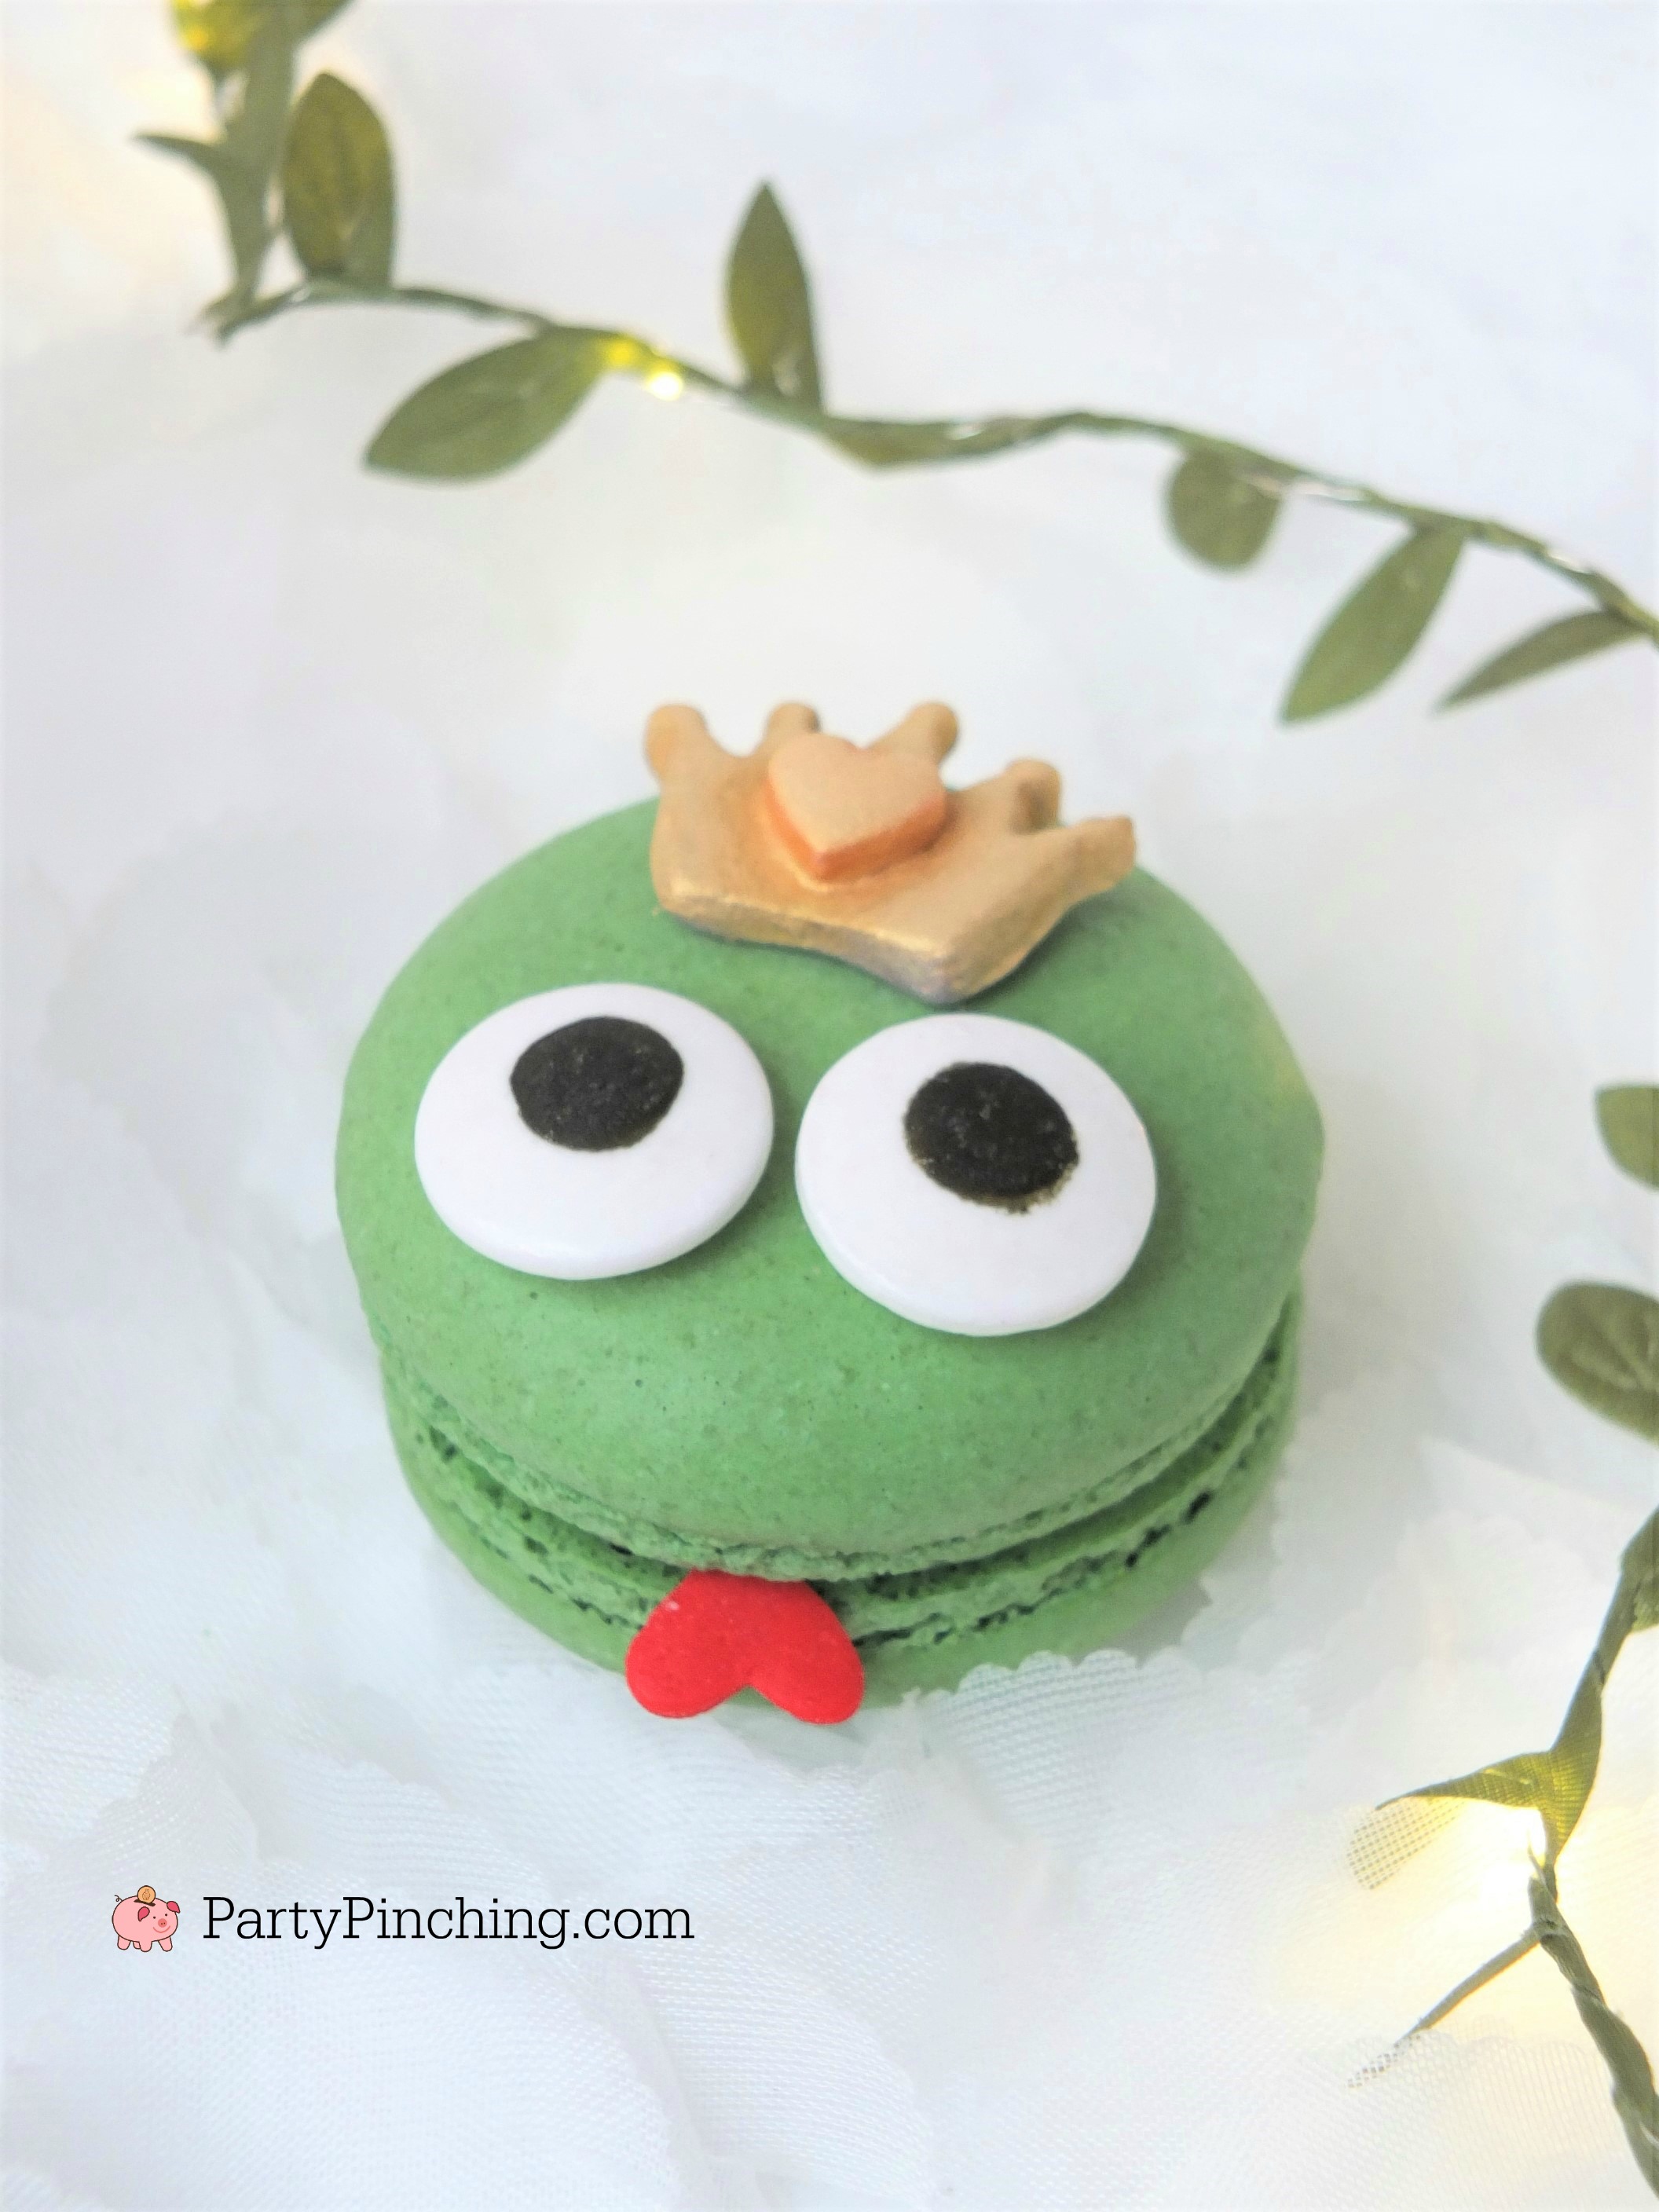 princess and frog macarons, cute macarons, princess party food ideas, cute desserts for pink girl party, princess party ideas, adorable dessert ideas, sweet treats, cute food, fun food for kids